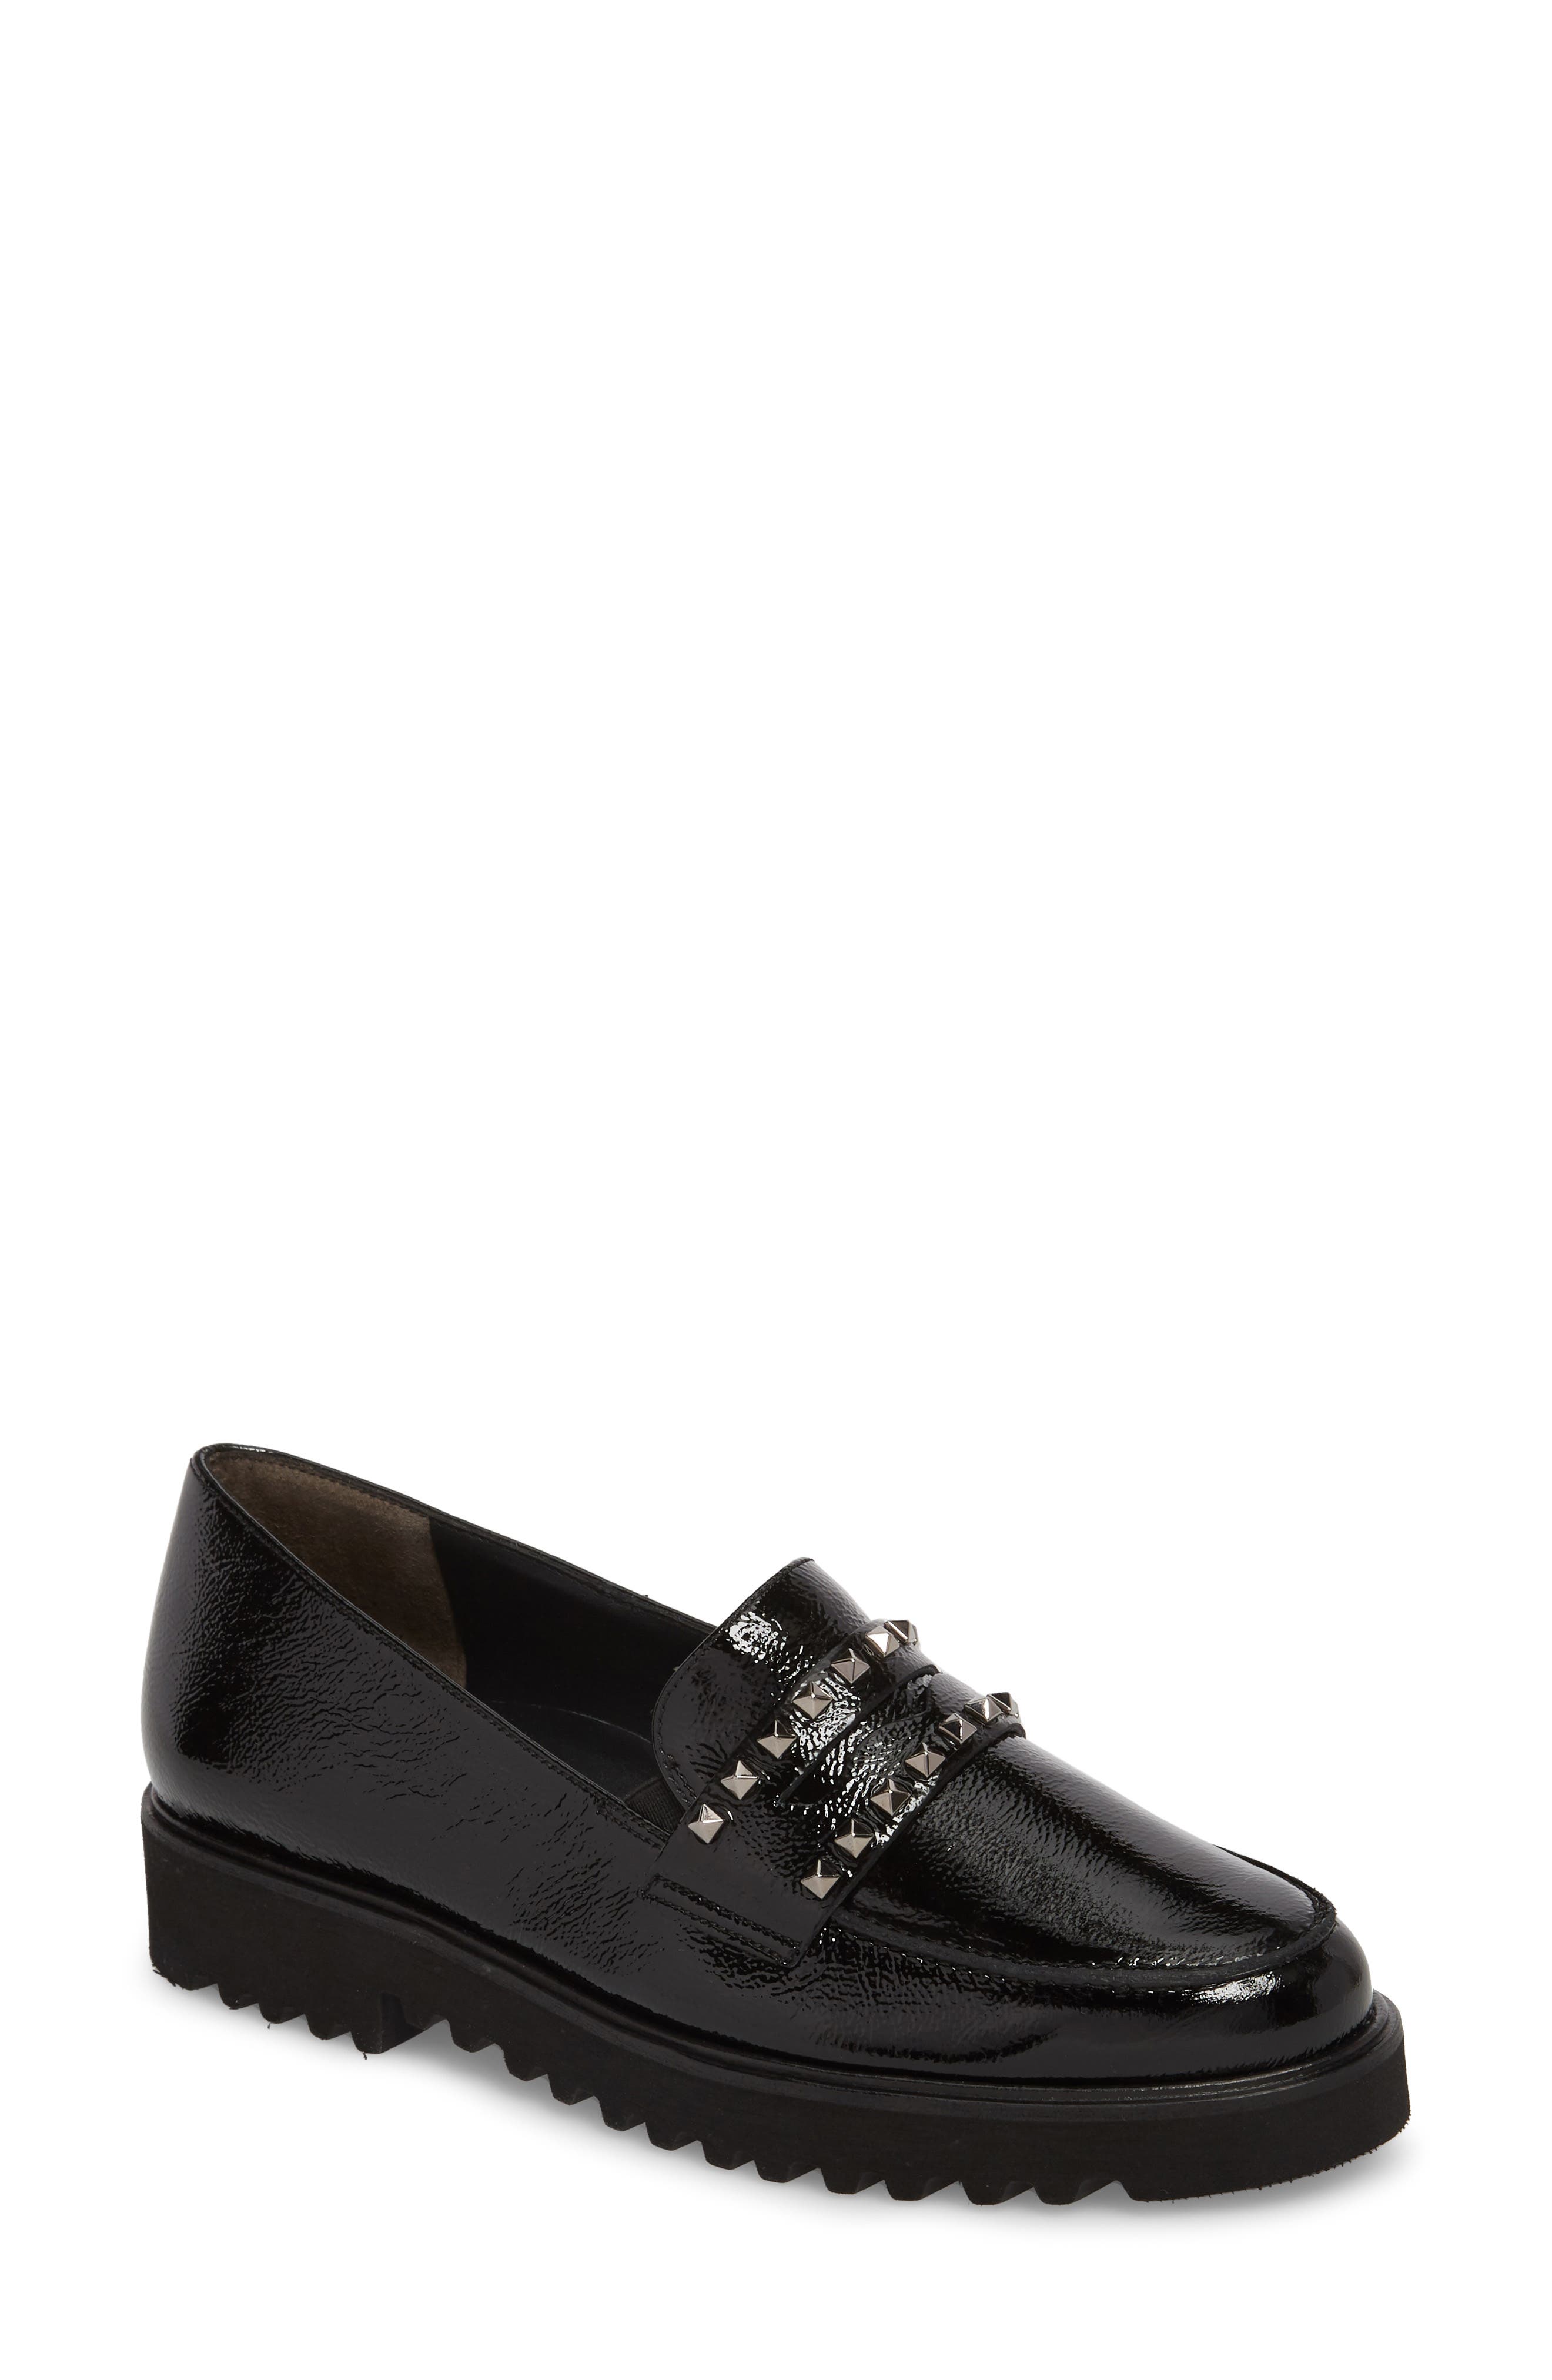 paul green studded loafers